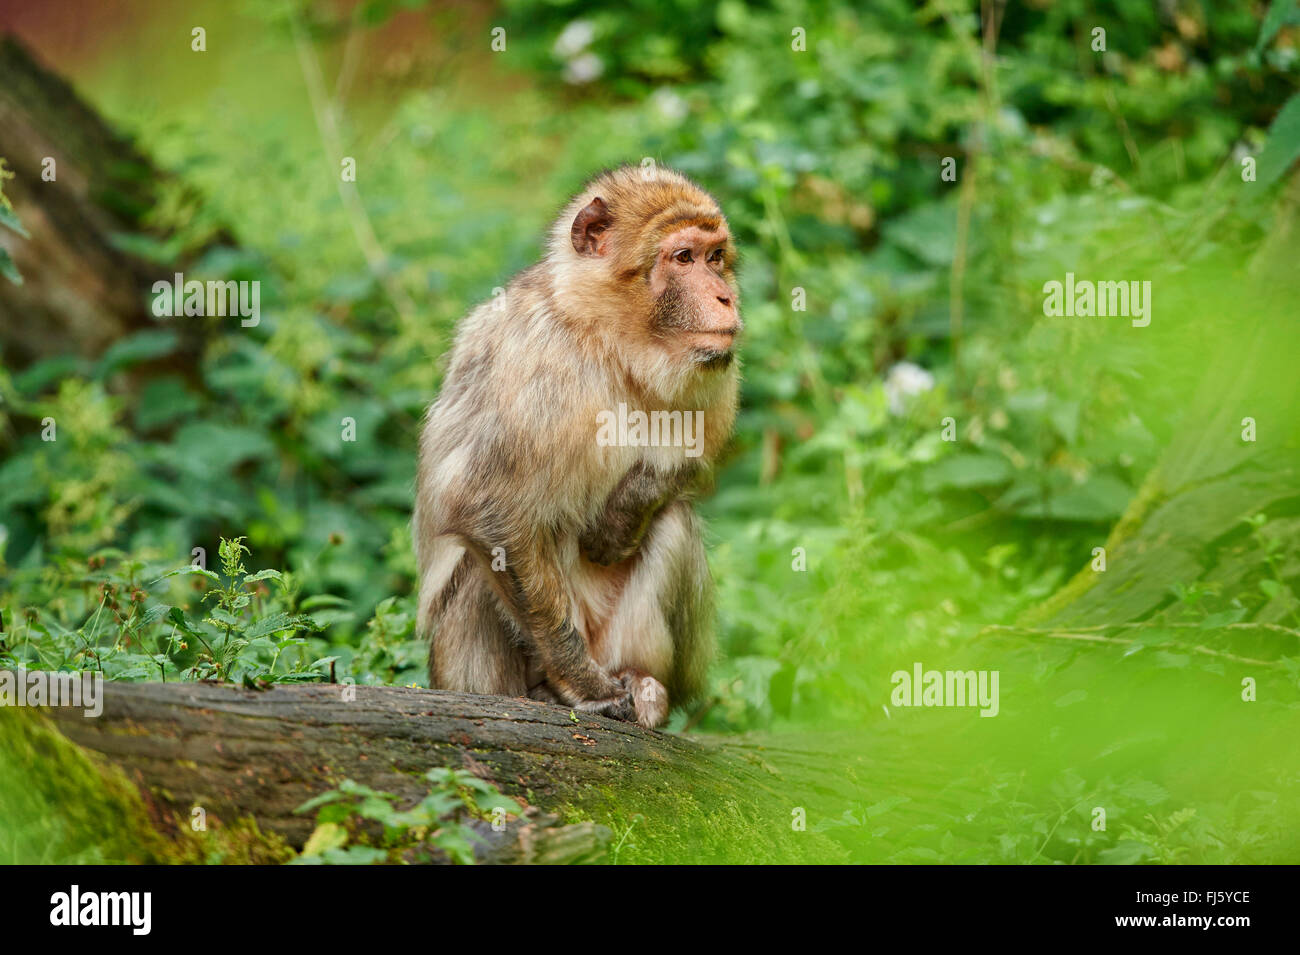 barbary ape, barbary macaque (Macaca sylvanus), resting on a branch Stock Photo